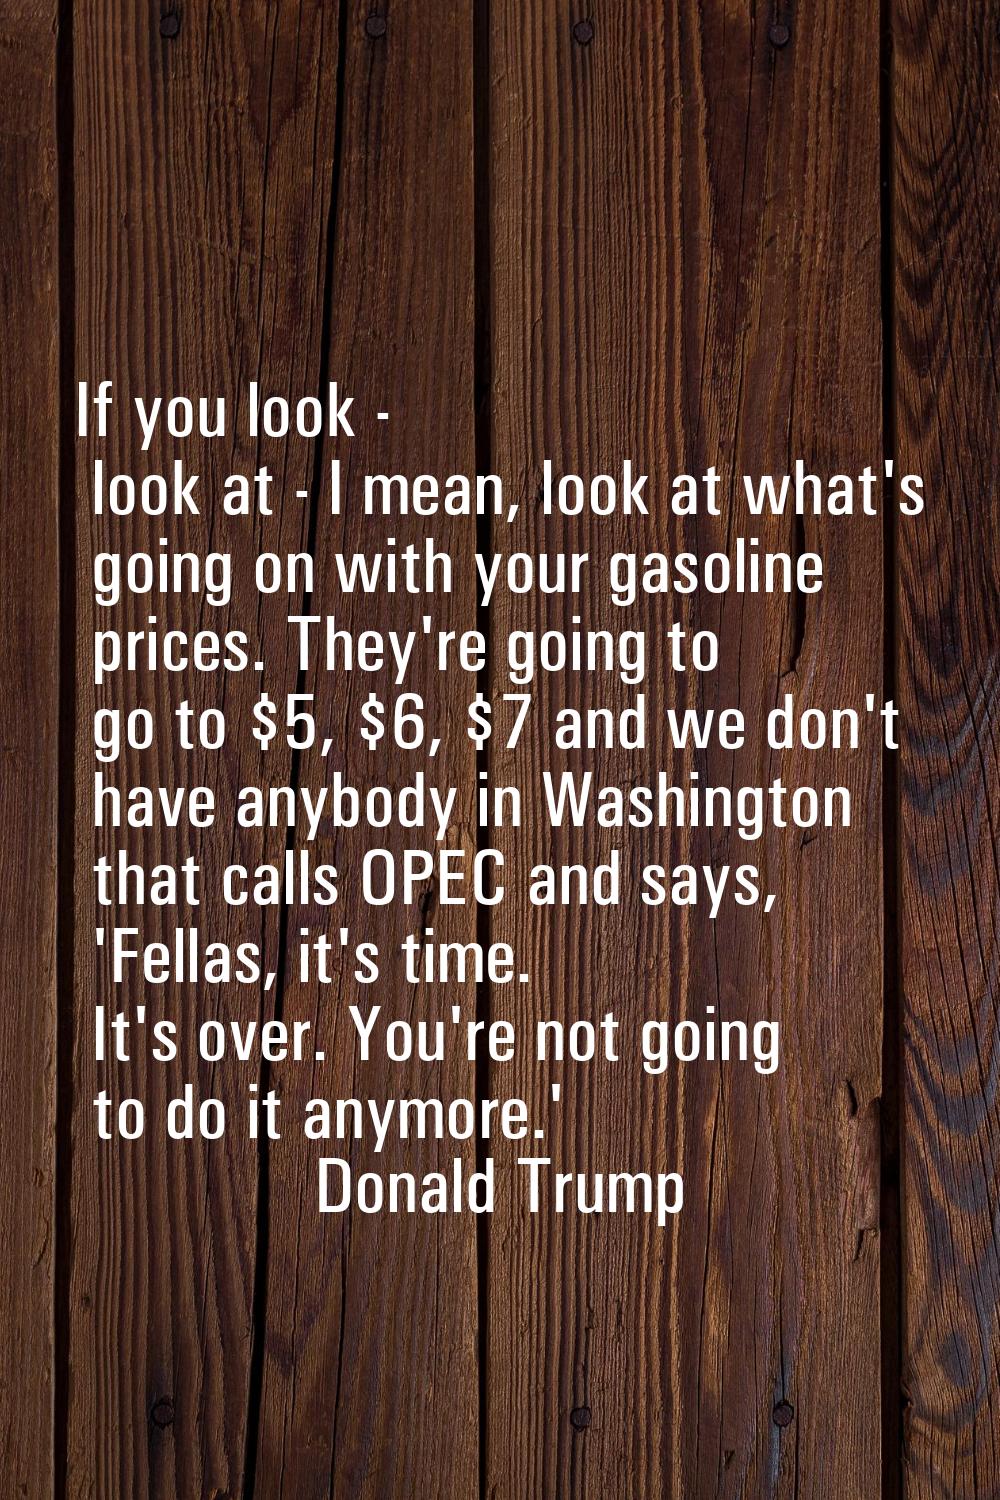 If you look - look at - I mean, look at what's going on with your gasoline prices. They're going to